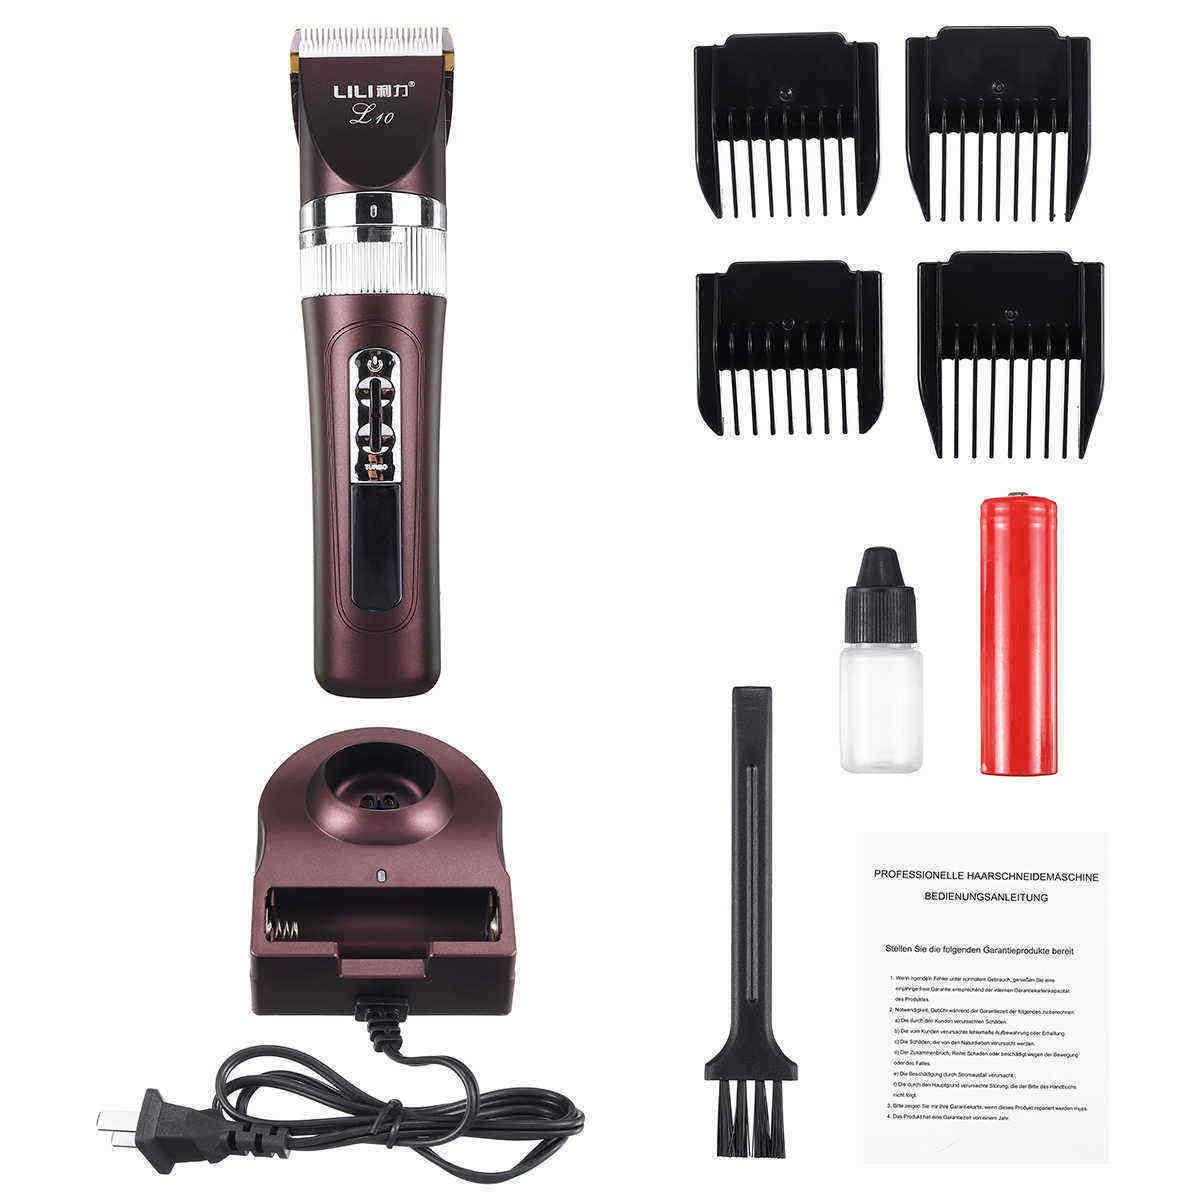 100-240V-Lcd-Display-Rechargeable-Professional-Hair-Clipper-Titianium-Cutter-Lithium-Battery-Hair-Tr-1463009